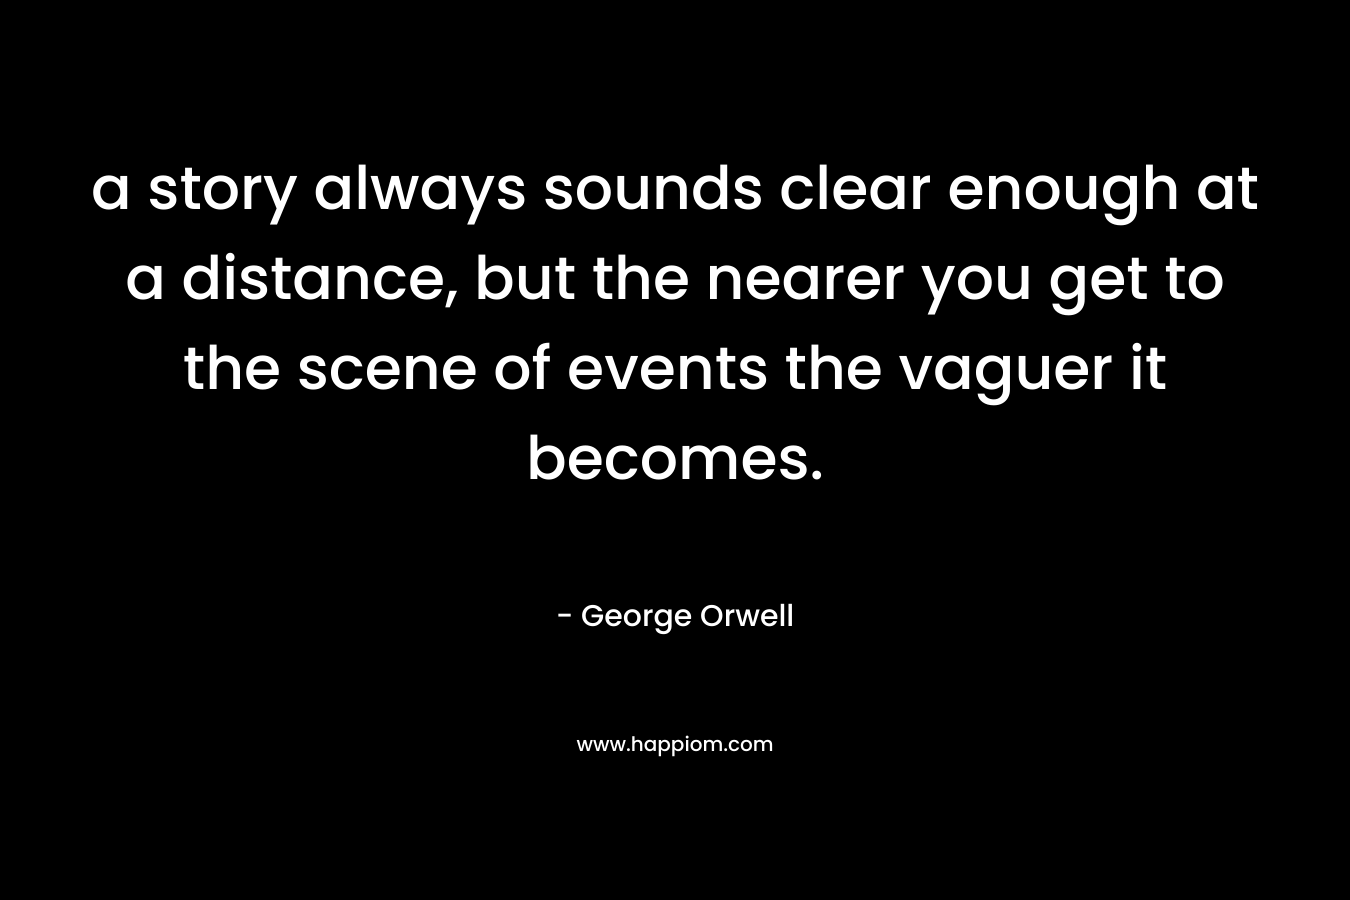 a story always sounds clear enough at a distance, but the nearer you get to the scene of events the vaguer it becomes. – George Orwell